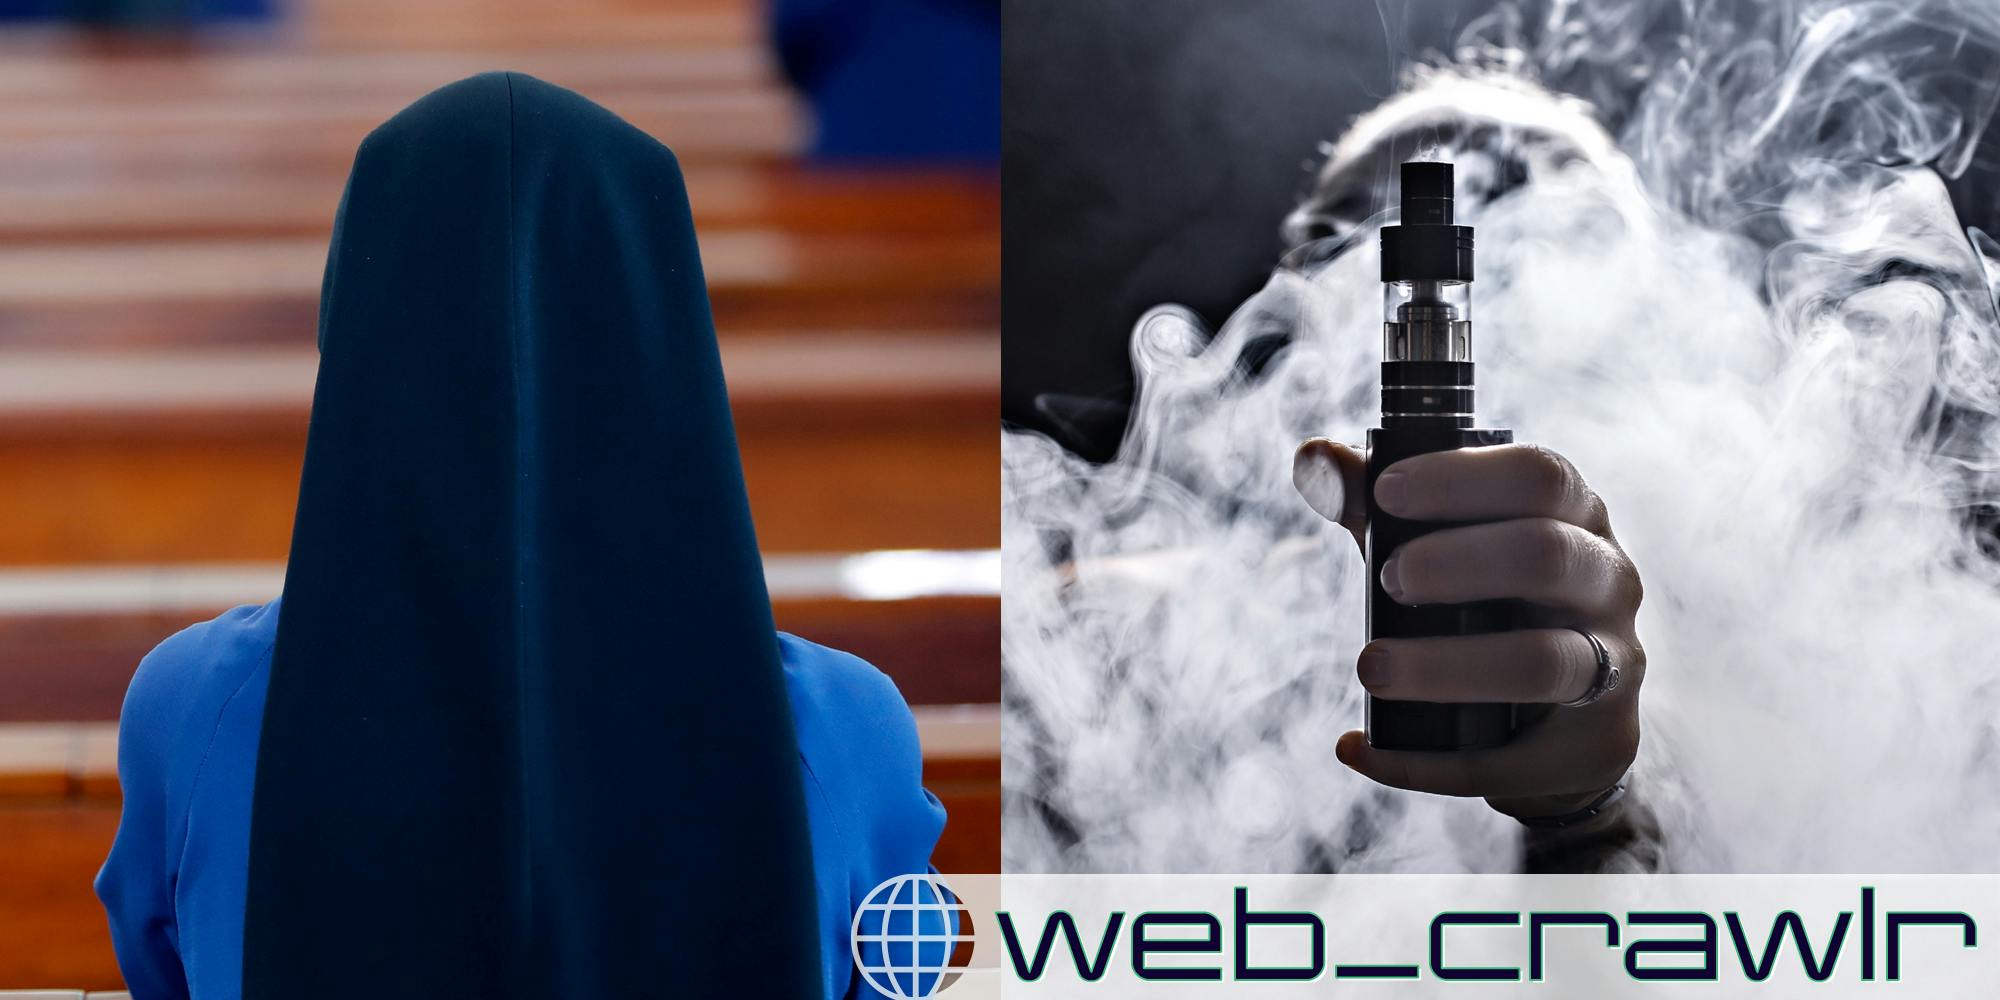 A side by side of a nun and a person holding a vape. The Daily Dot newsletter web_crawlr logo is in the bottom right corner.